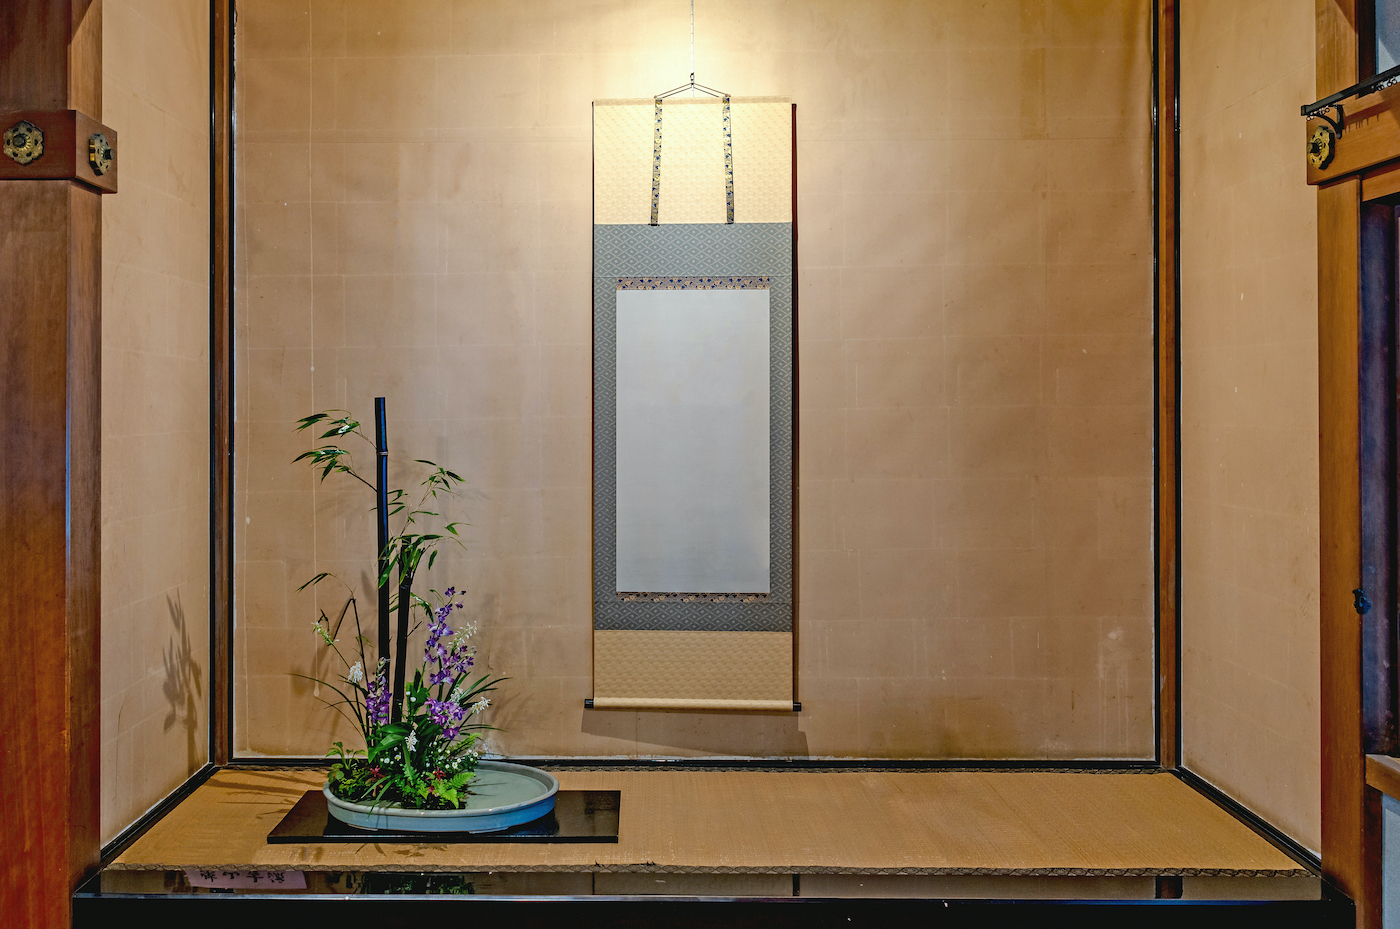 Traditional Japanese interior, hanging scroll